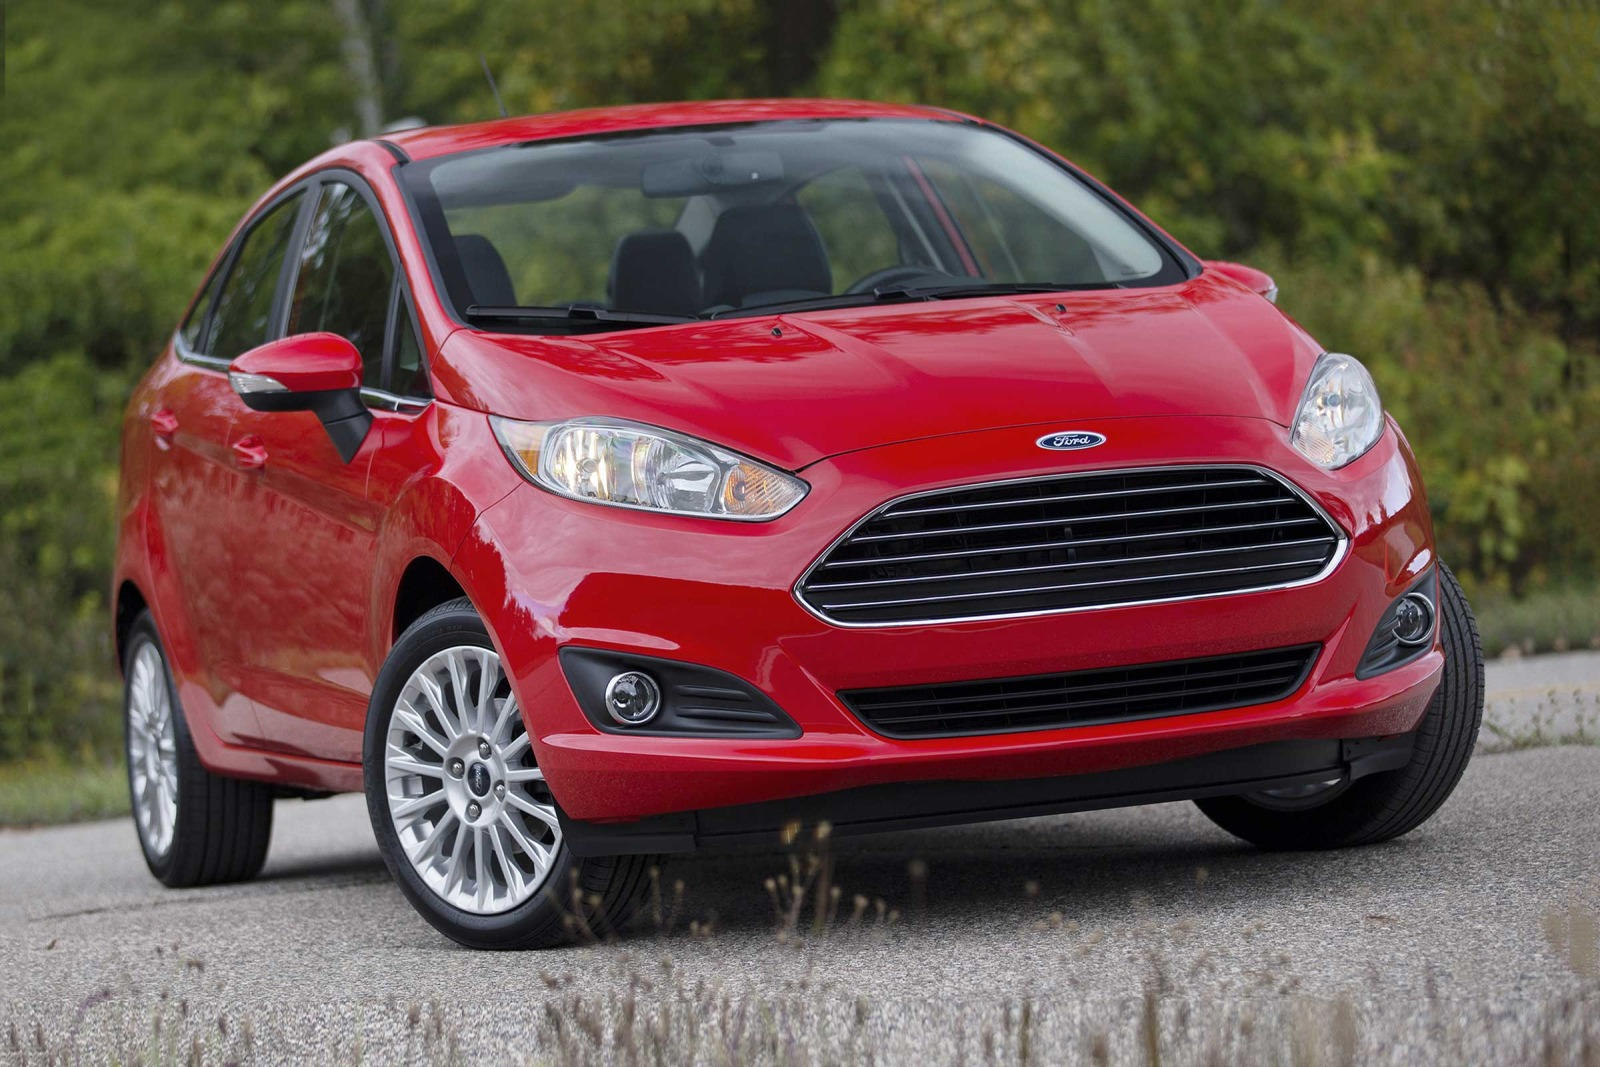 2015 Ford Fiesta St Review - Drive